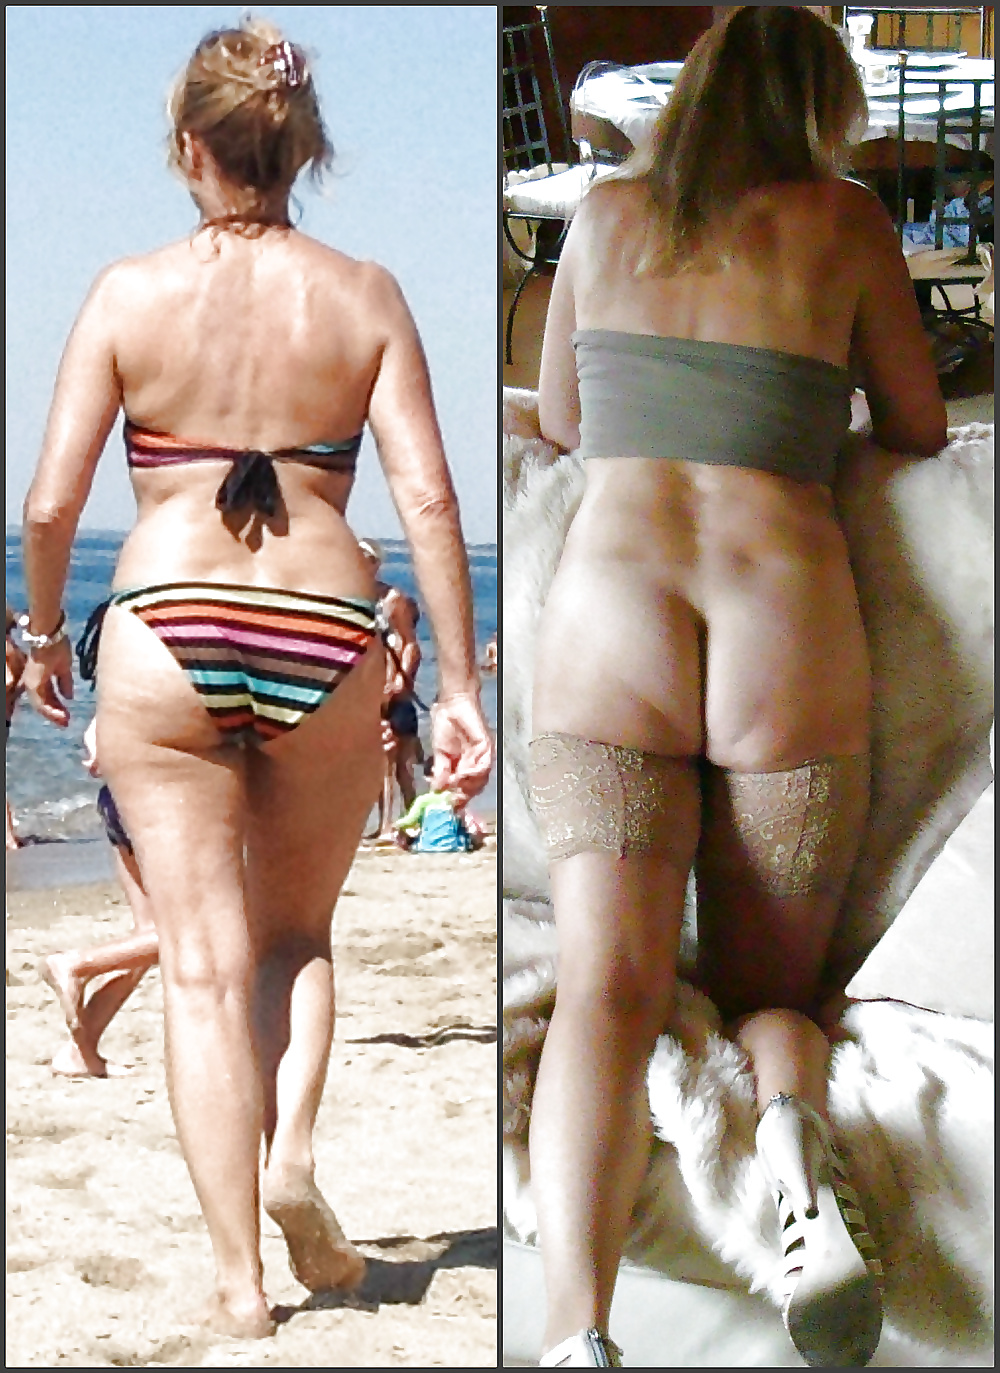 Even cellulite can makes a woman so sexy    (5/19)